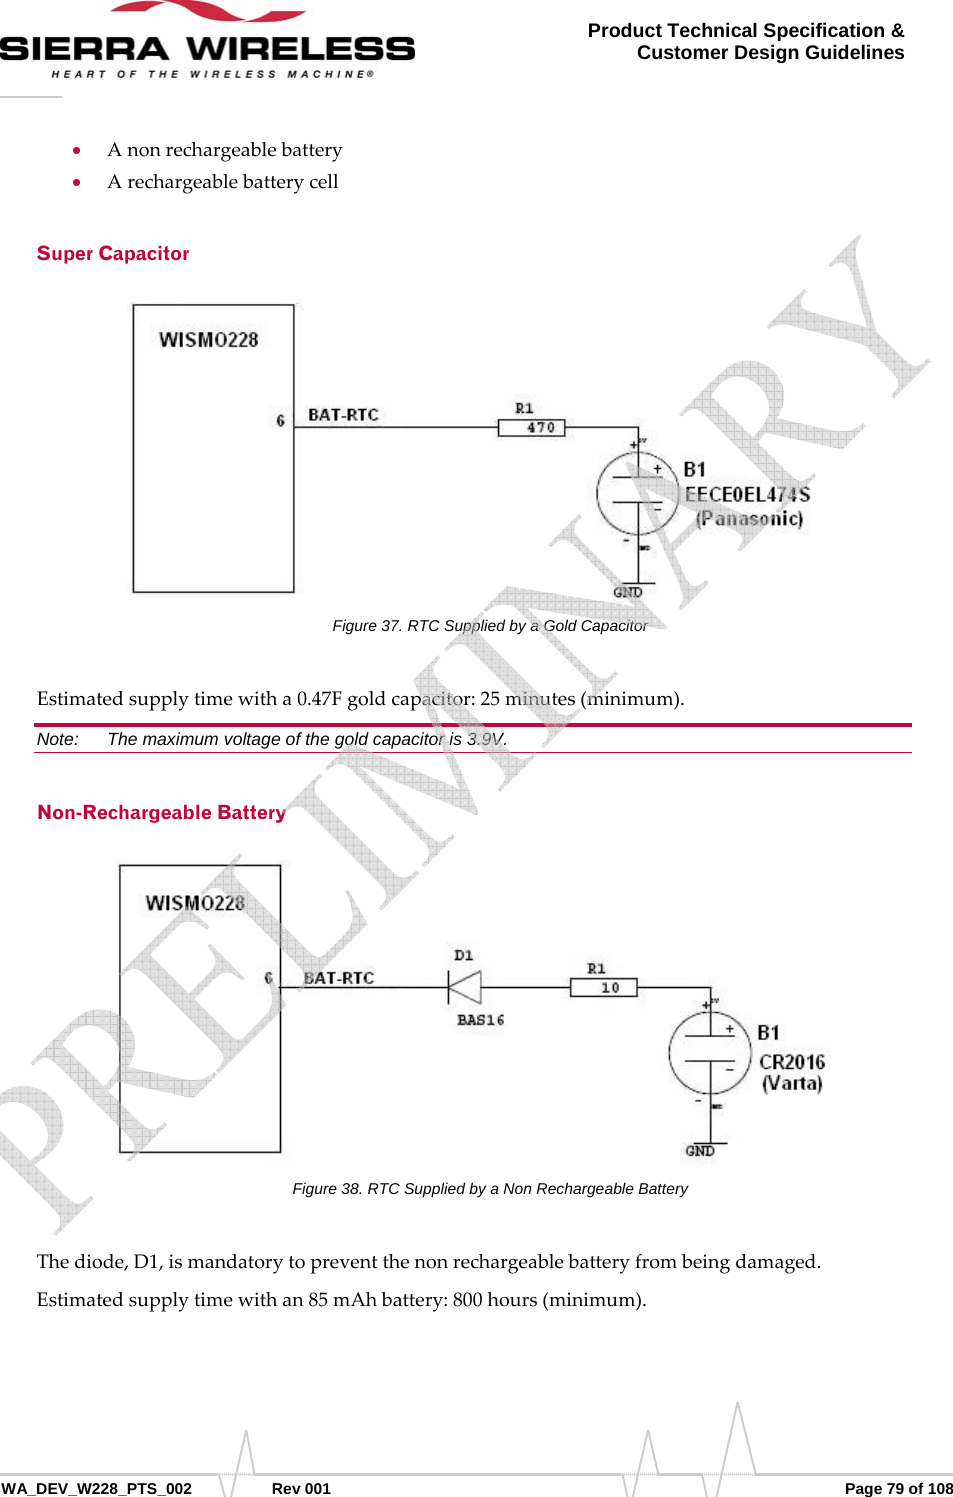      WA_DEV_W228_PTS_002 Rev 001  Page 79 of 108 Product Technical Specification &amp; Customer Design Guidelines • Anonrechargeablebattery• ArechargeablebatterycellSuper Capacitor Figure 37. RTC Supplied by a Gold Capacitor Estimatedsupplytimewitha0.47Fgoldcapacitor:25minutes(minimum).Note:   The maximum voltage of the gold capacitor is 3.9V. Non-Rechargeable Battery Figure 38. RTC Supplied by a Non Rechargeable Battery Thediode,D1,ismandatorytopreventthenonrechargeablebatteryfrombeingdamaged.Estimatedsupplytimewithan85mAhbattery:800hours(minimum).   